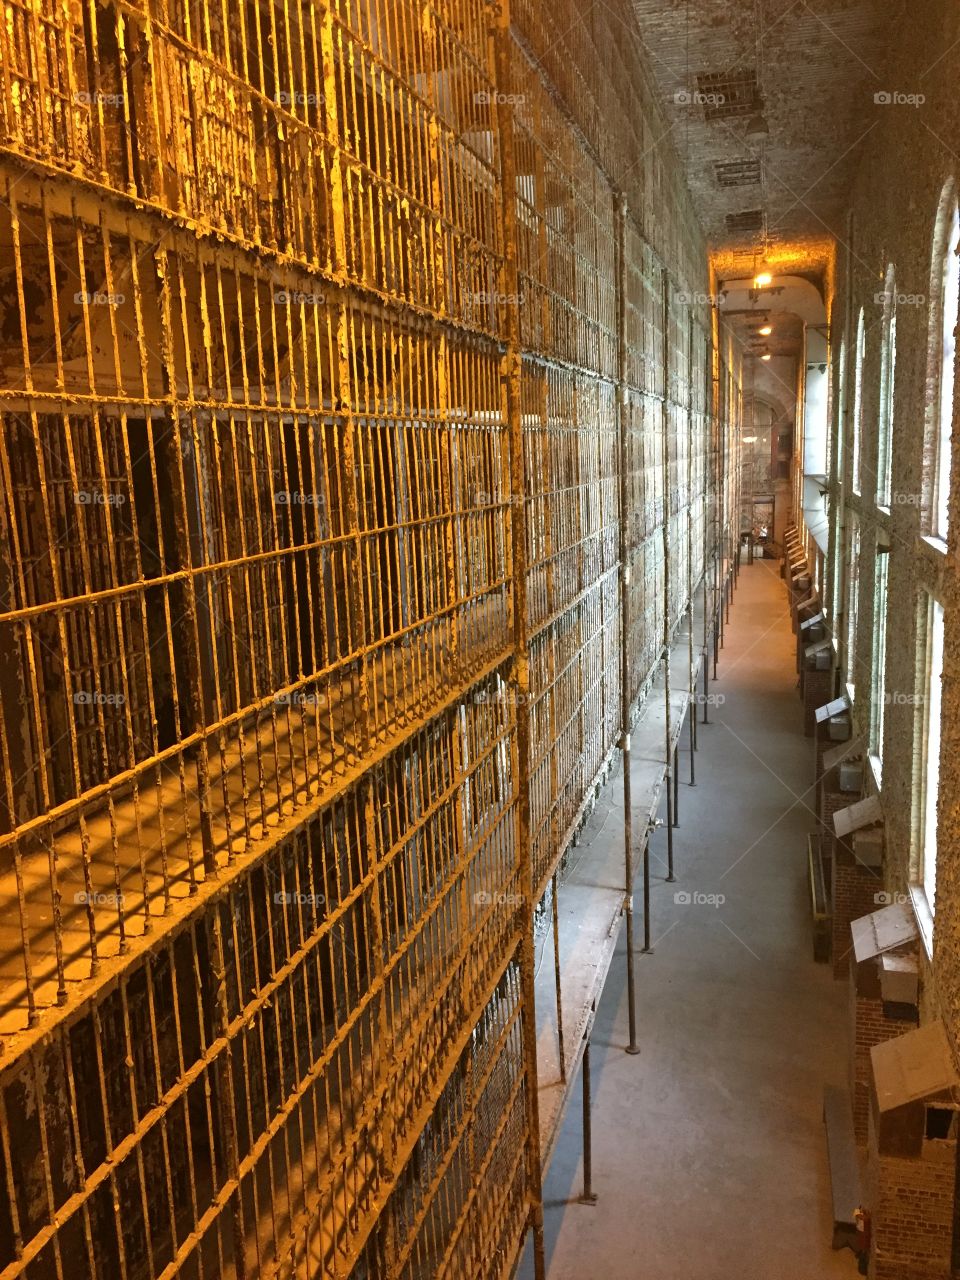 Reformatory cell 4